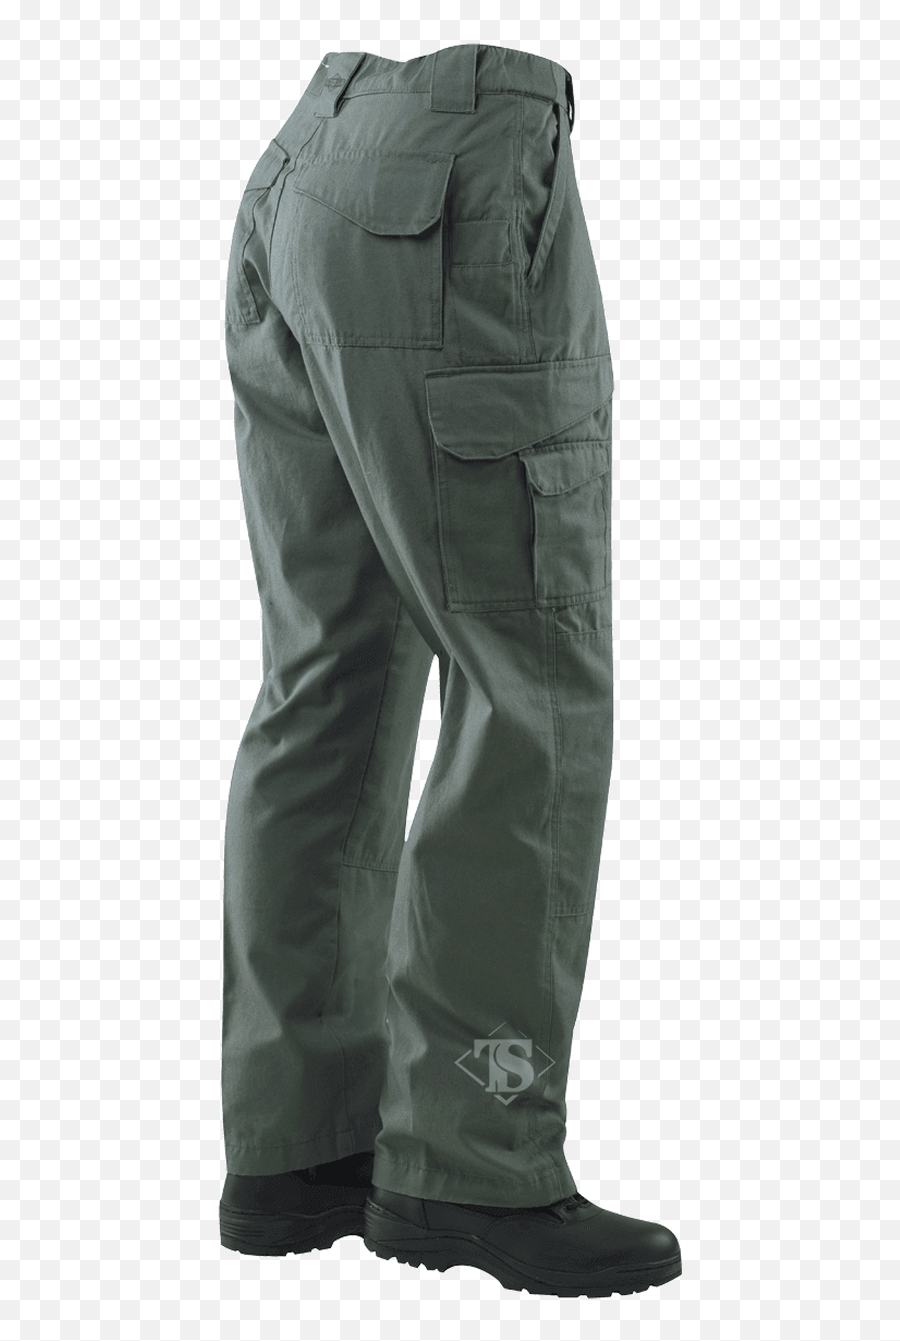 Tru - Spec Ts1042 247 Series Menu0027s Original Tactical Pants Ripstop Polyestercotton Relaxed Fit Adjustable Waist Knee Pad Pockets Expandable Tru Spec Kalhoty Png,Icon Insulated Denim Pants